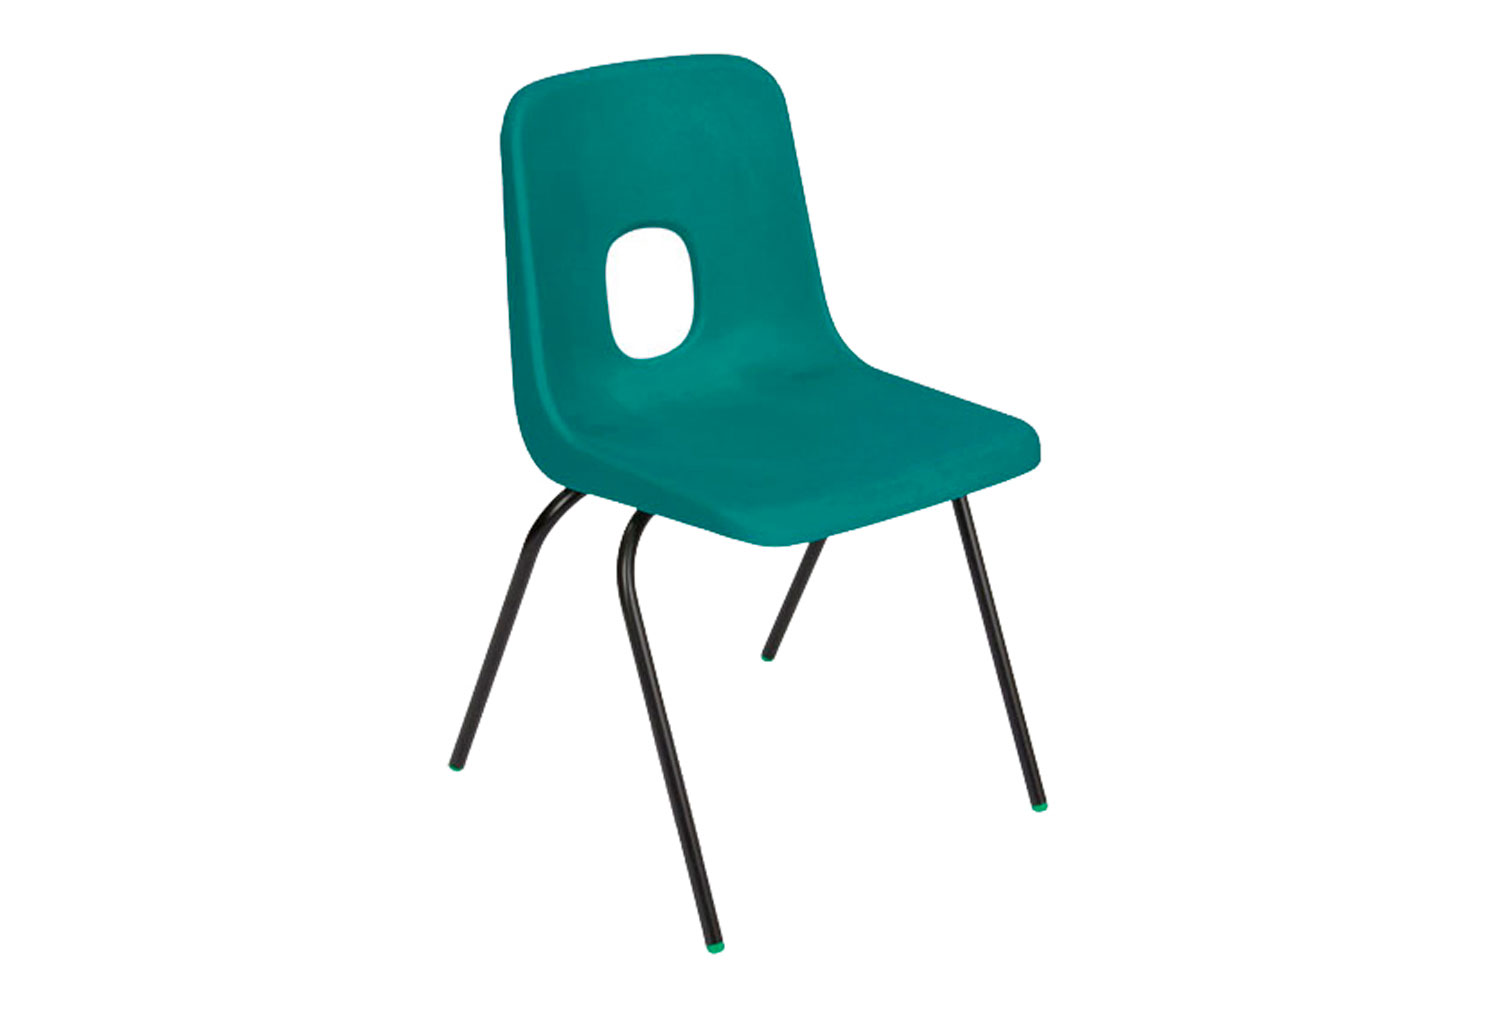 Qty 8 - Hille E Series Classroom Chair, 4-6 Years - 33wx29dx31h (cm), Black Frame, Jade